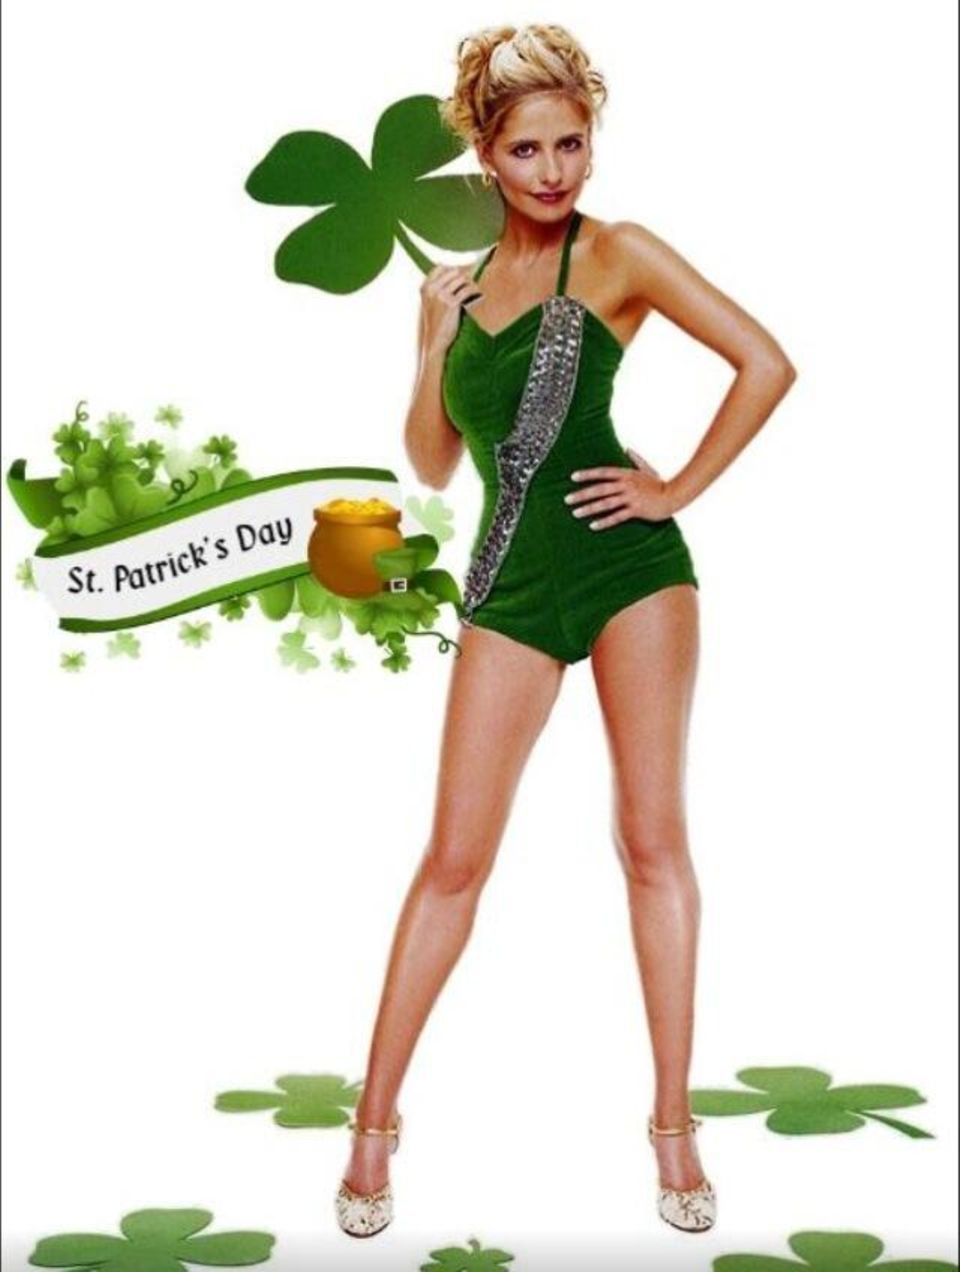 Sarah Michelle Prinze ruft zu Achtsamkeit beim Trinken am St. Patrick's Day auf: "Everyone enjoy today, but remember to drink sensibly- or non-sensibly (is that a word?) and take a cab!"